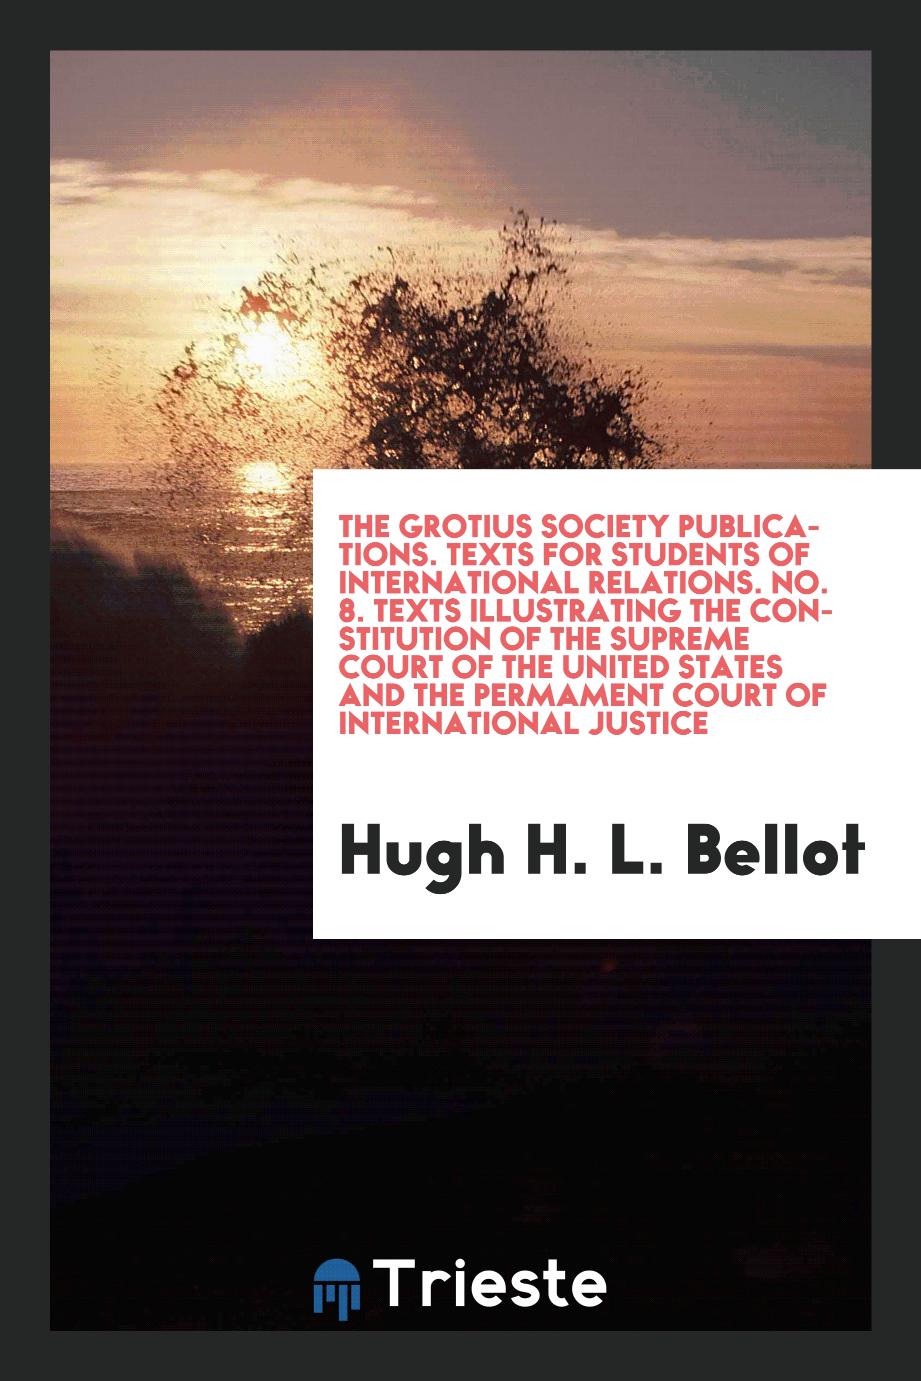 The Grotius Society Publications. Texts for Students of International Relations. No. 8. Texts Illustrating the Constitution of the Supreme Court of the United States and the Permament Court of International Justice